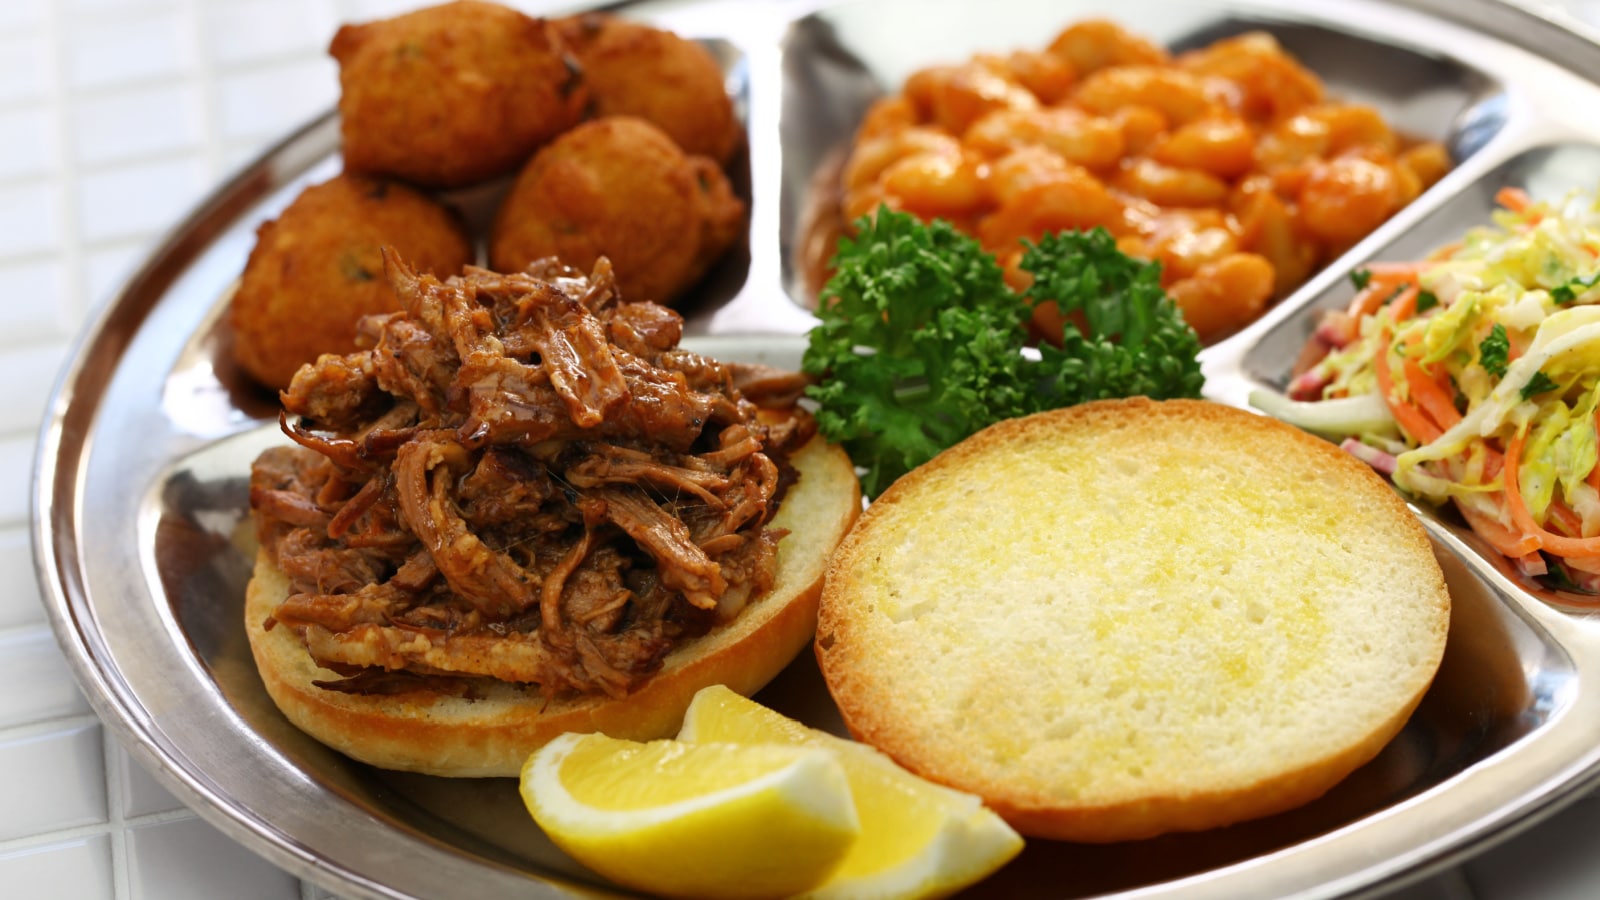 North Carolina barbecue ; pulled pork, hush puppies, baked beans and coleslaw